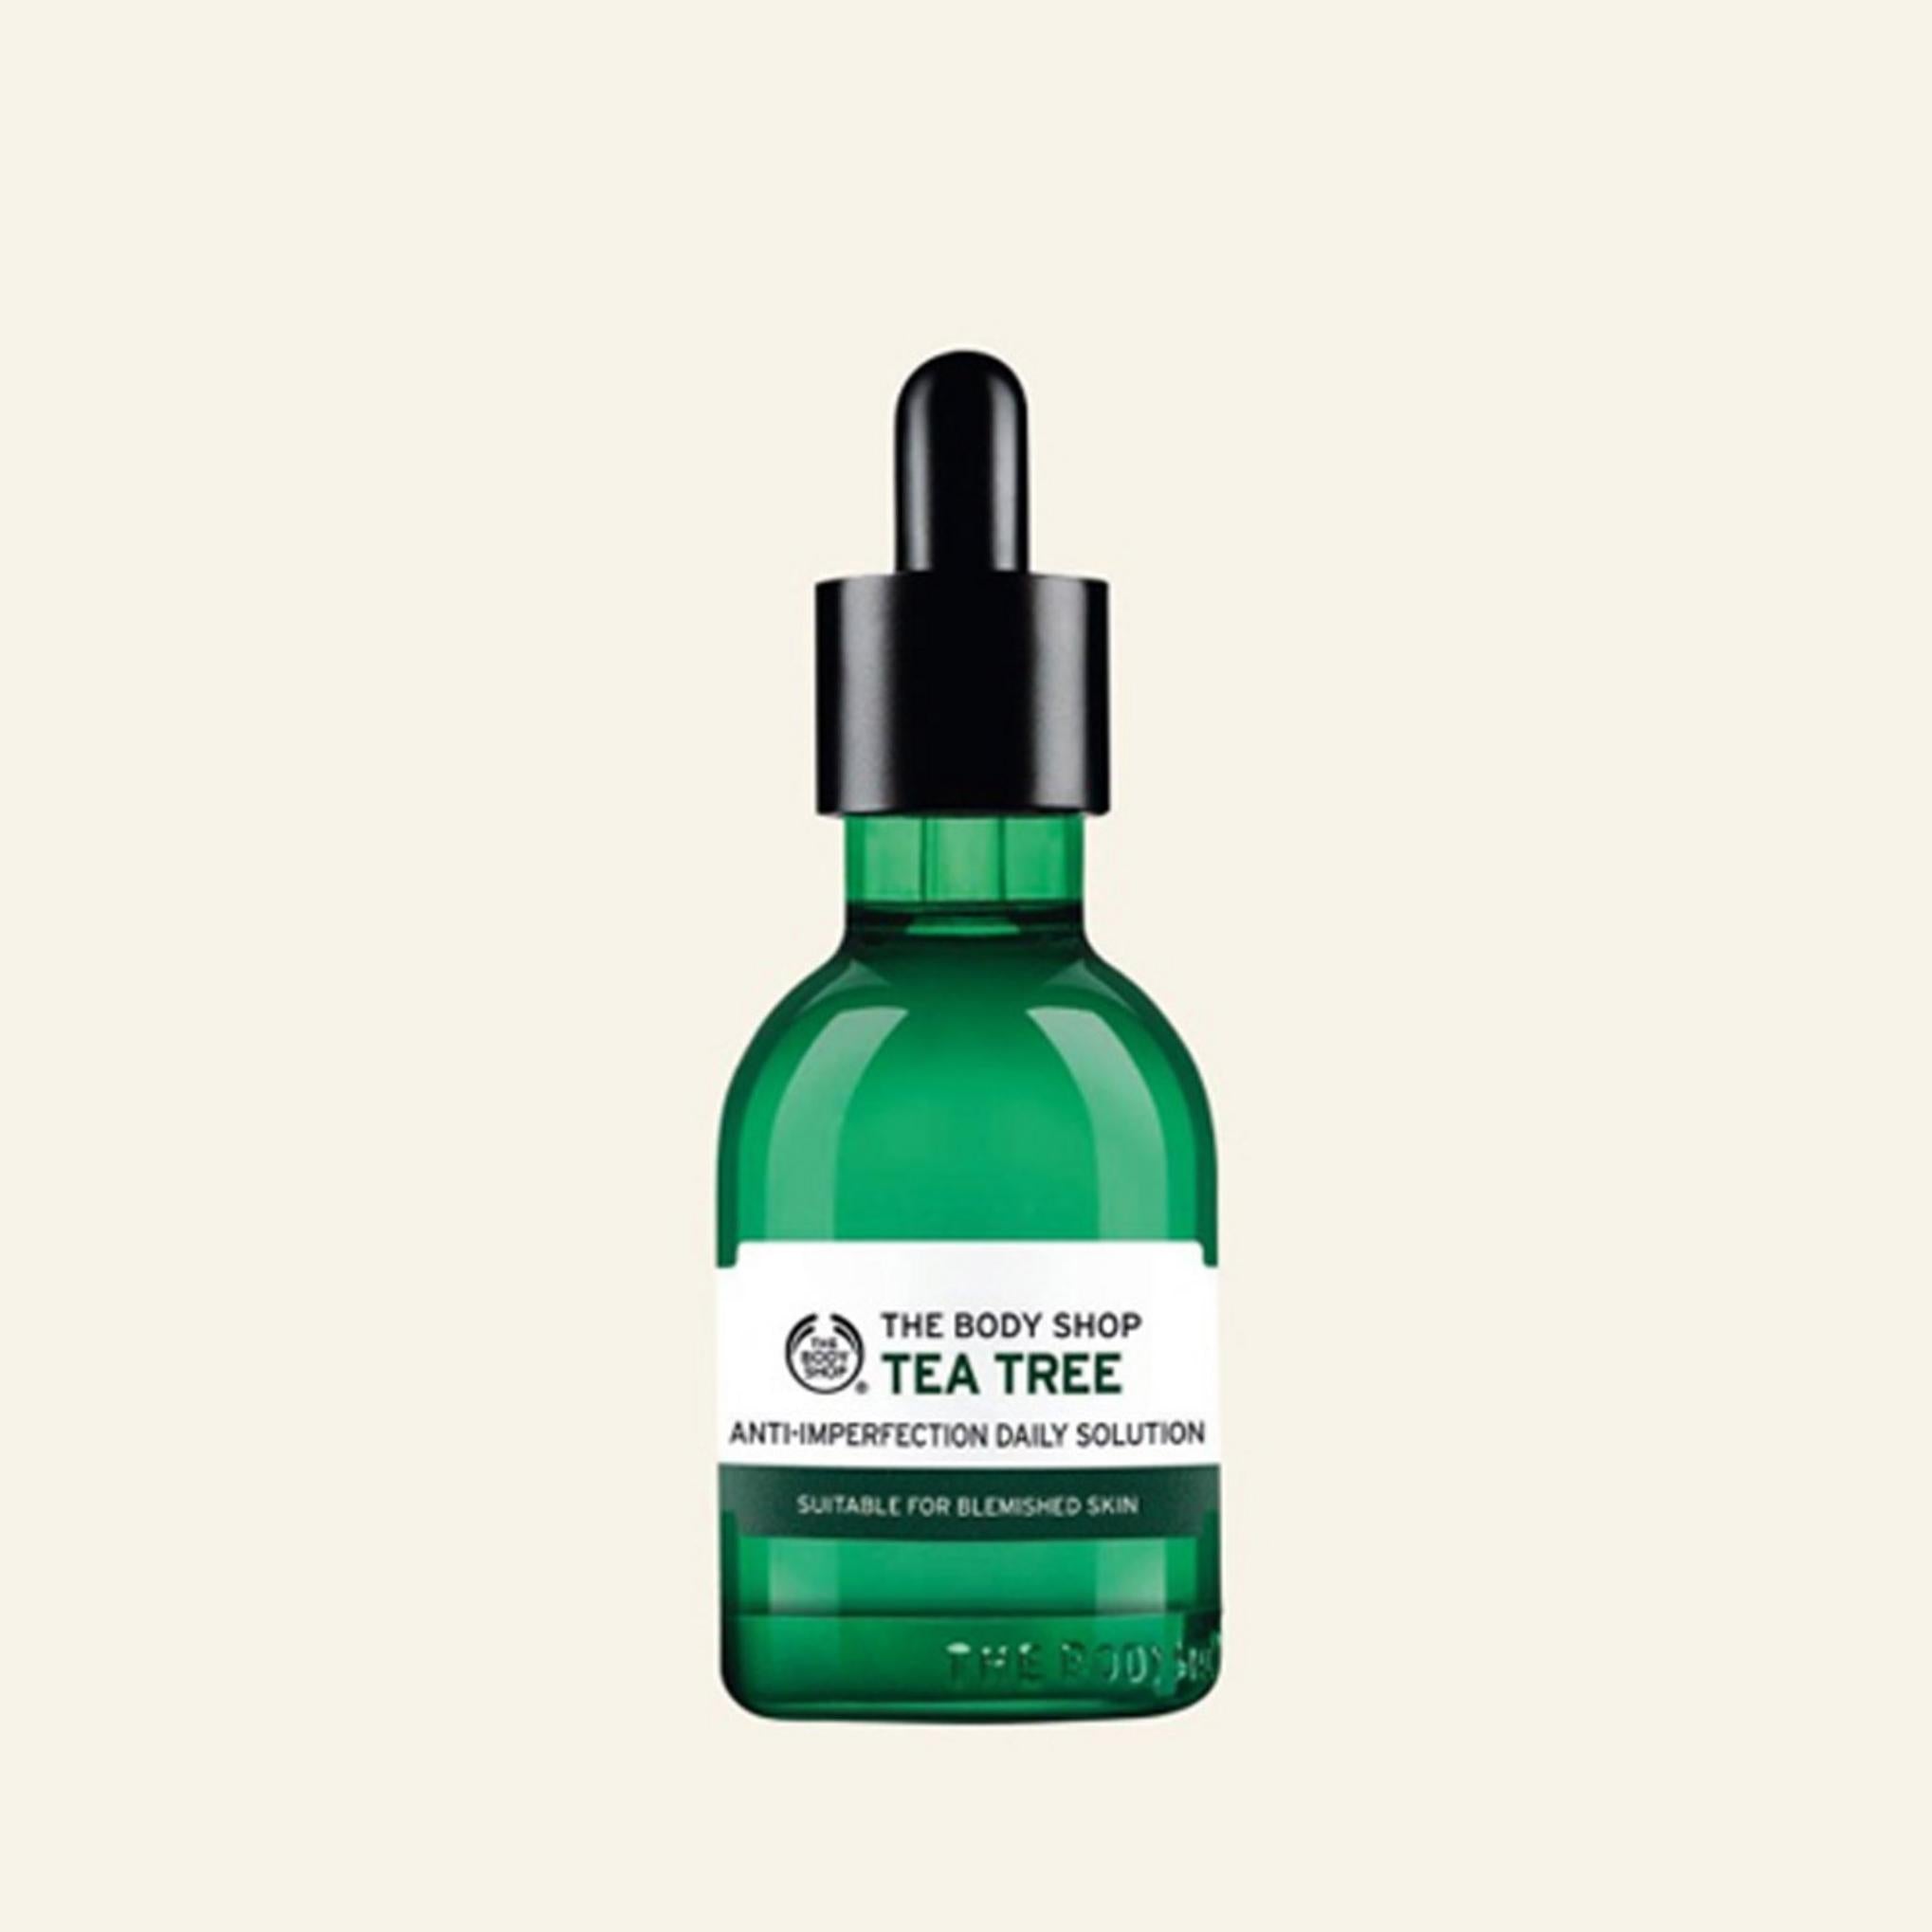 The Body Shop Tea Tree Skin Clearing Daily Solution Serum